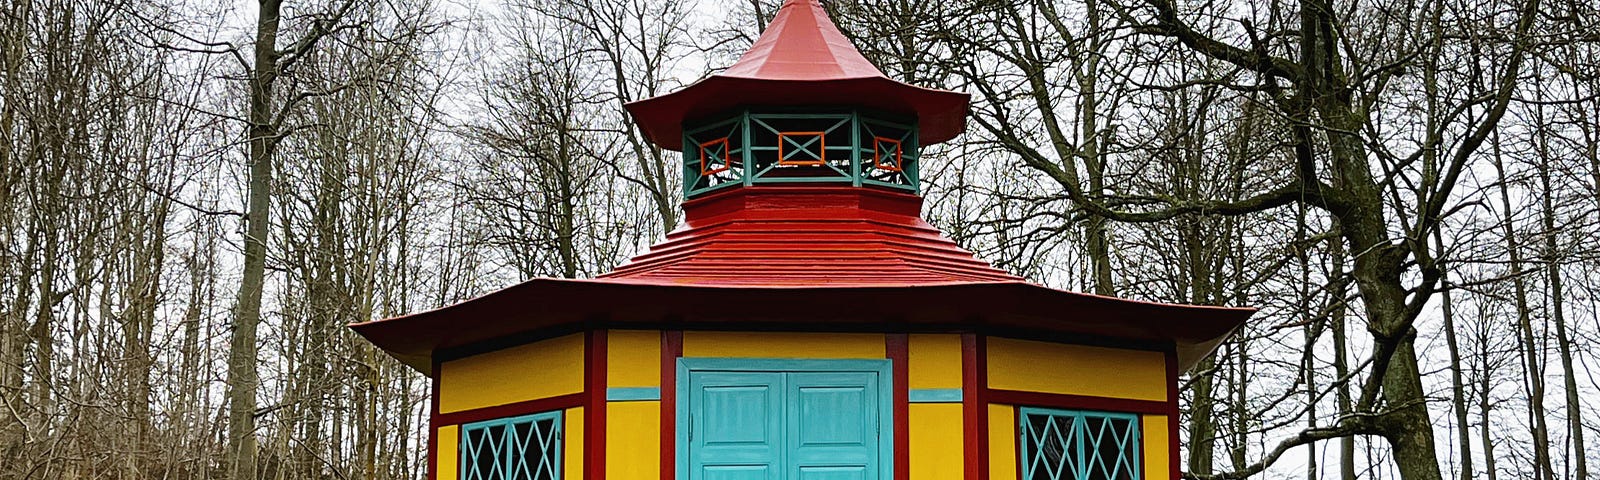 A small, hexagonal, 18th-century teahouse, painted bright yellow. with red and turquoise trim. Surrounded by bare wintery trees and set in a bright moss-green lawn.